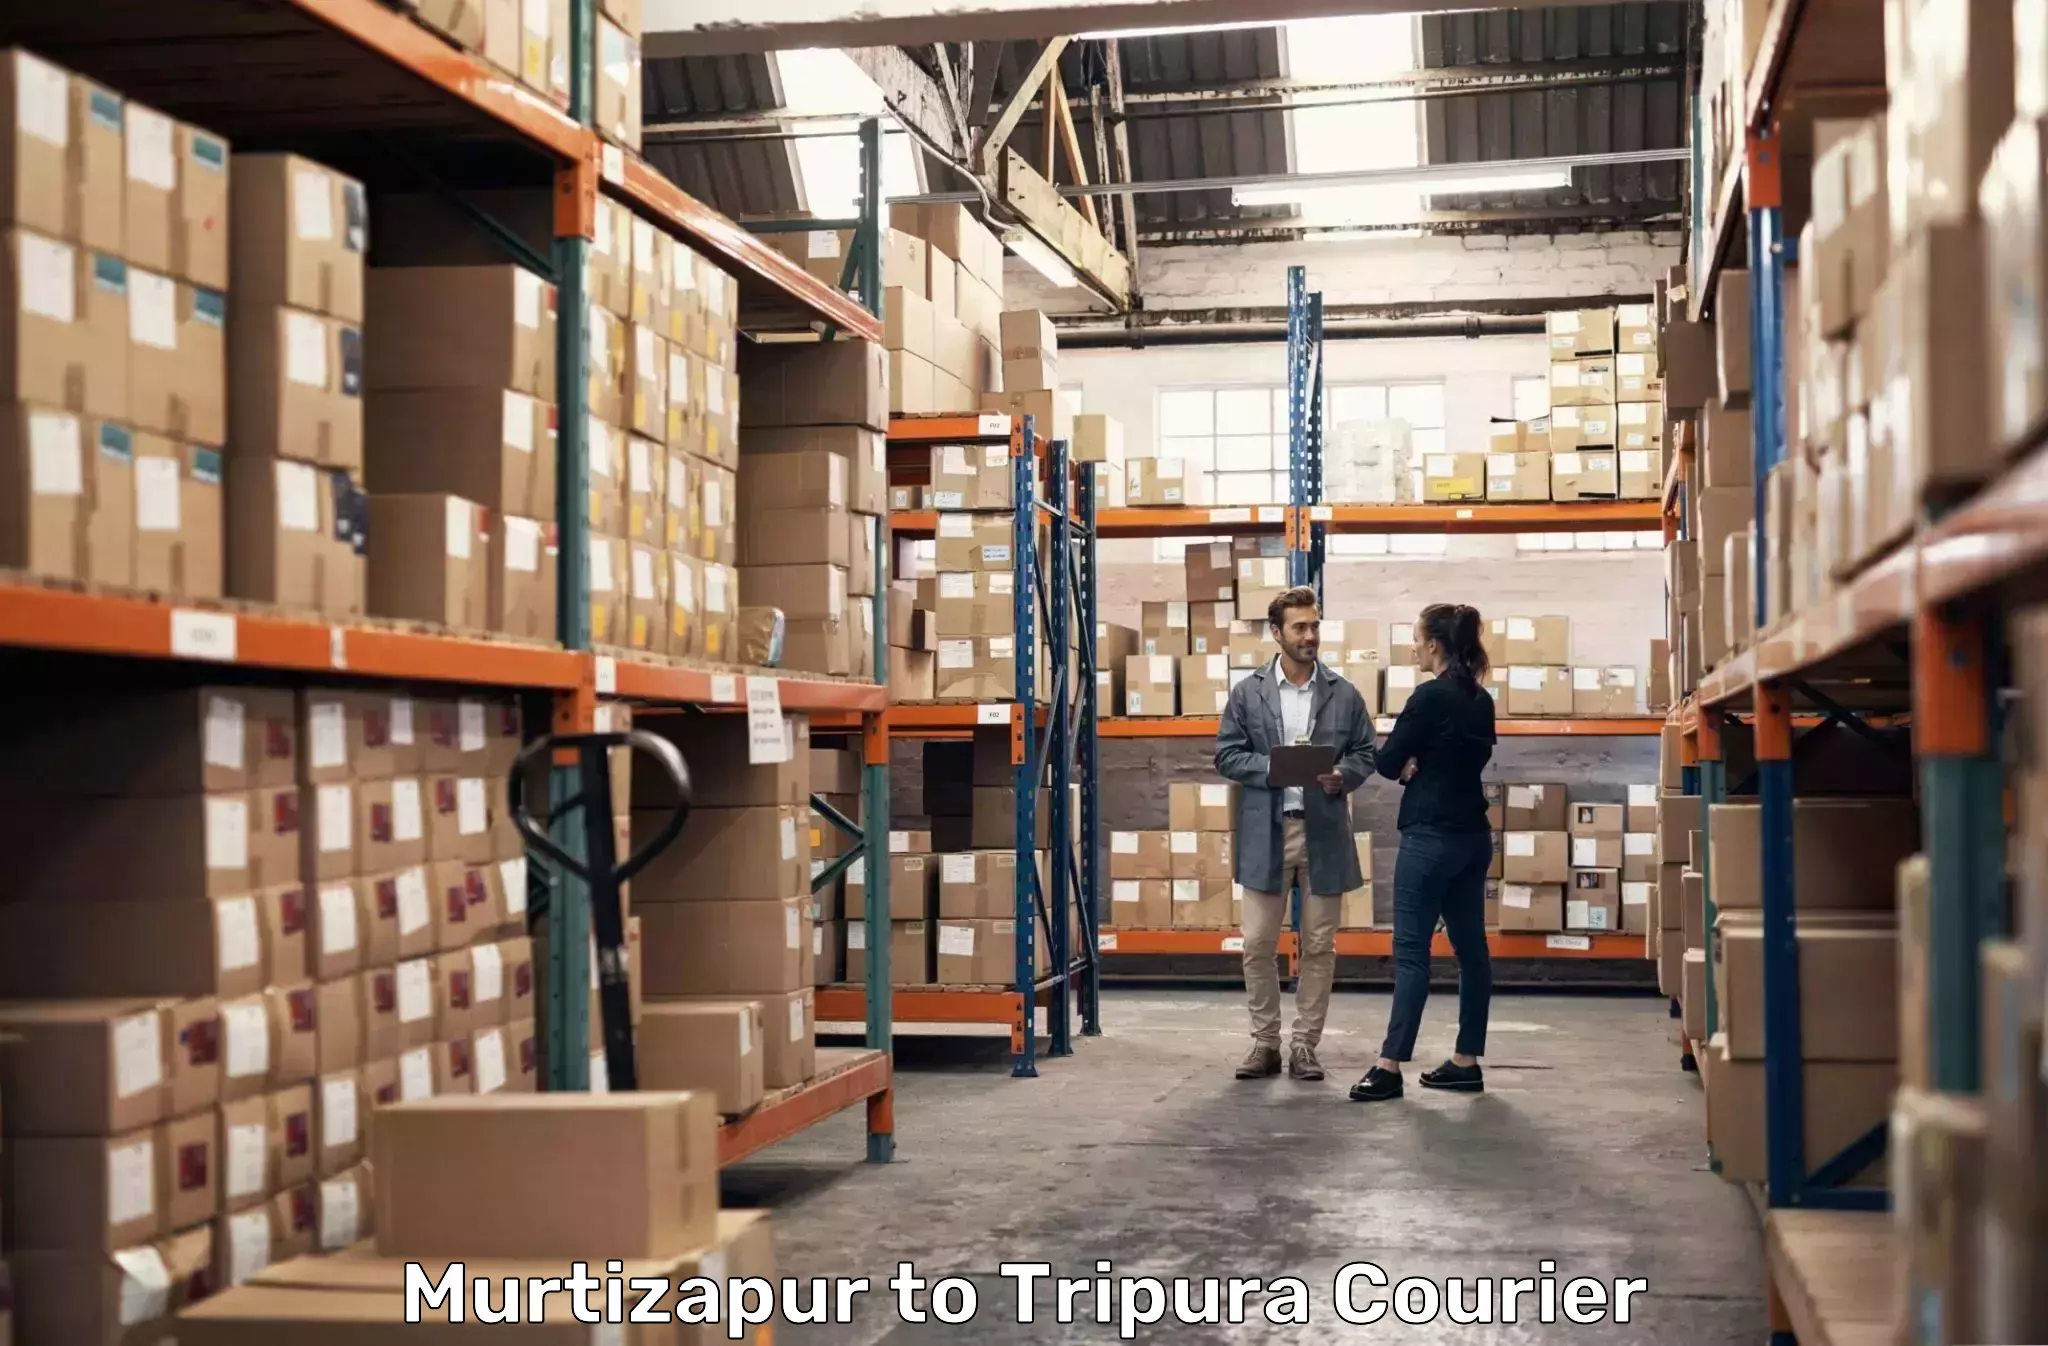 Global courier networks Murtizapur to Udaipur Tripura